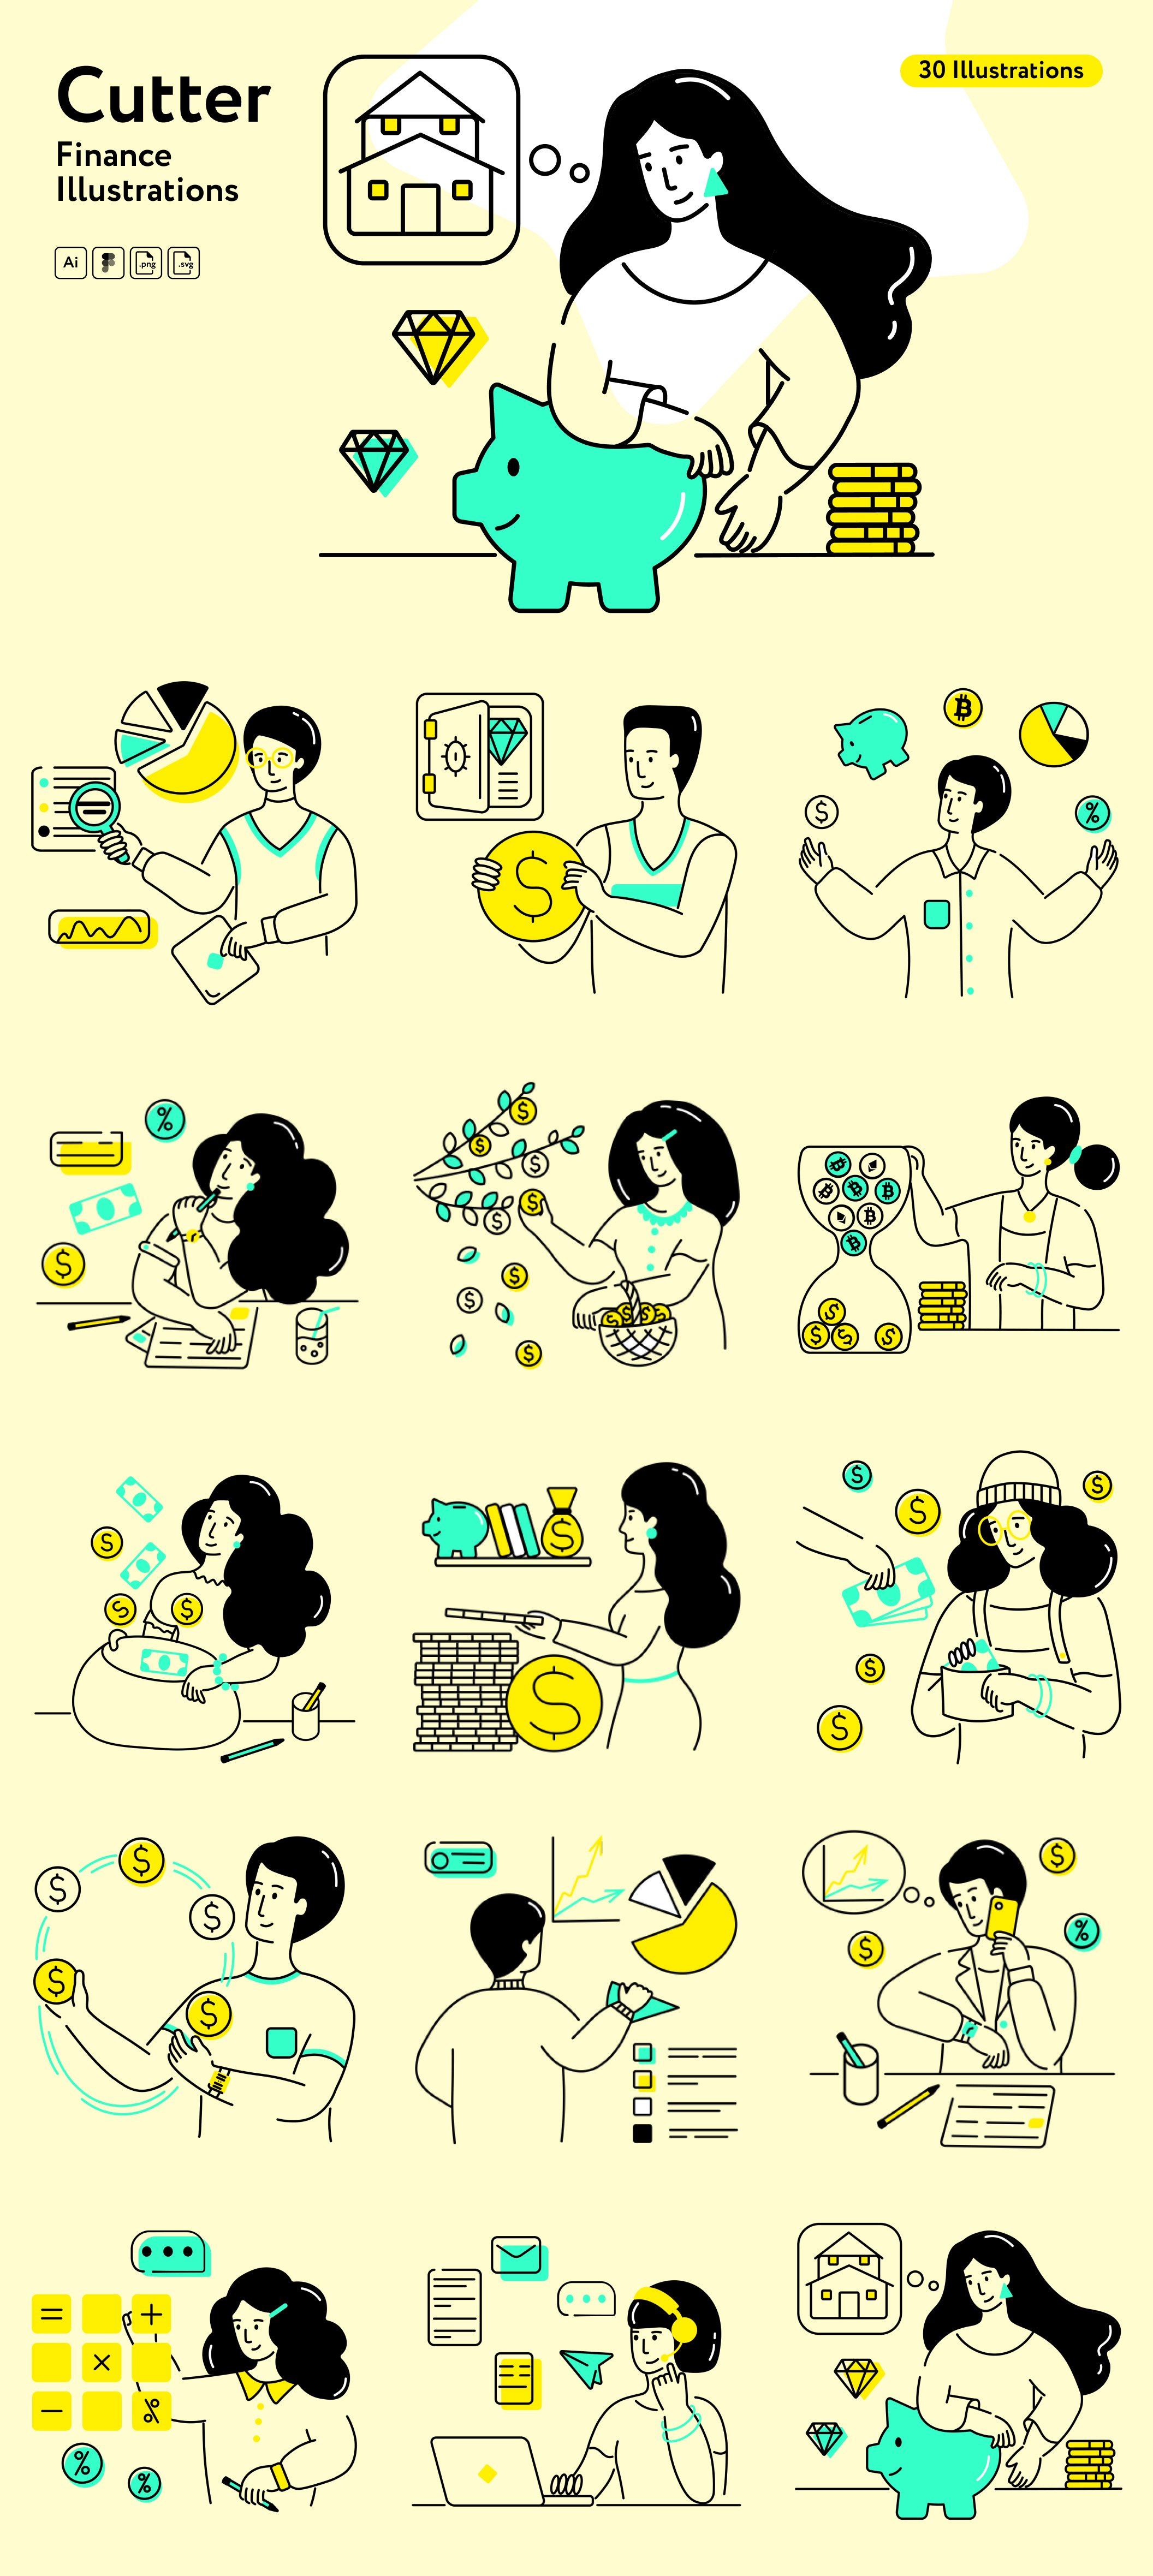 A series of illustrations depicting different types of people.